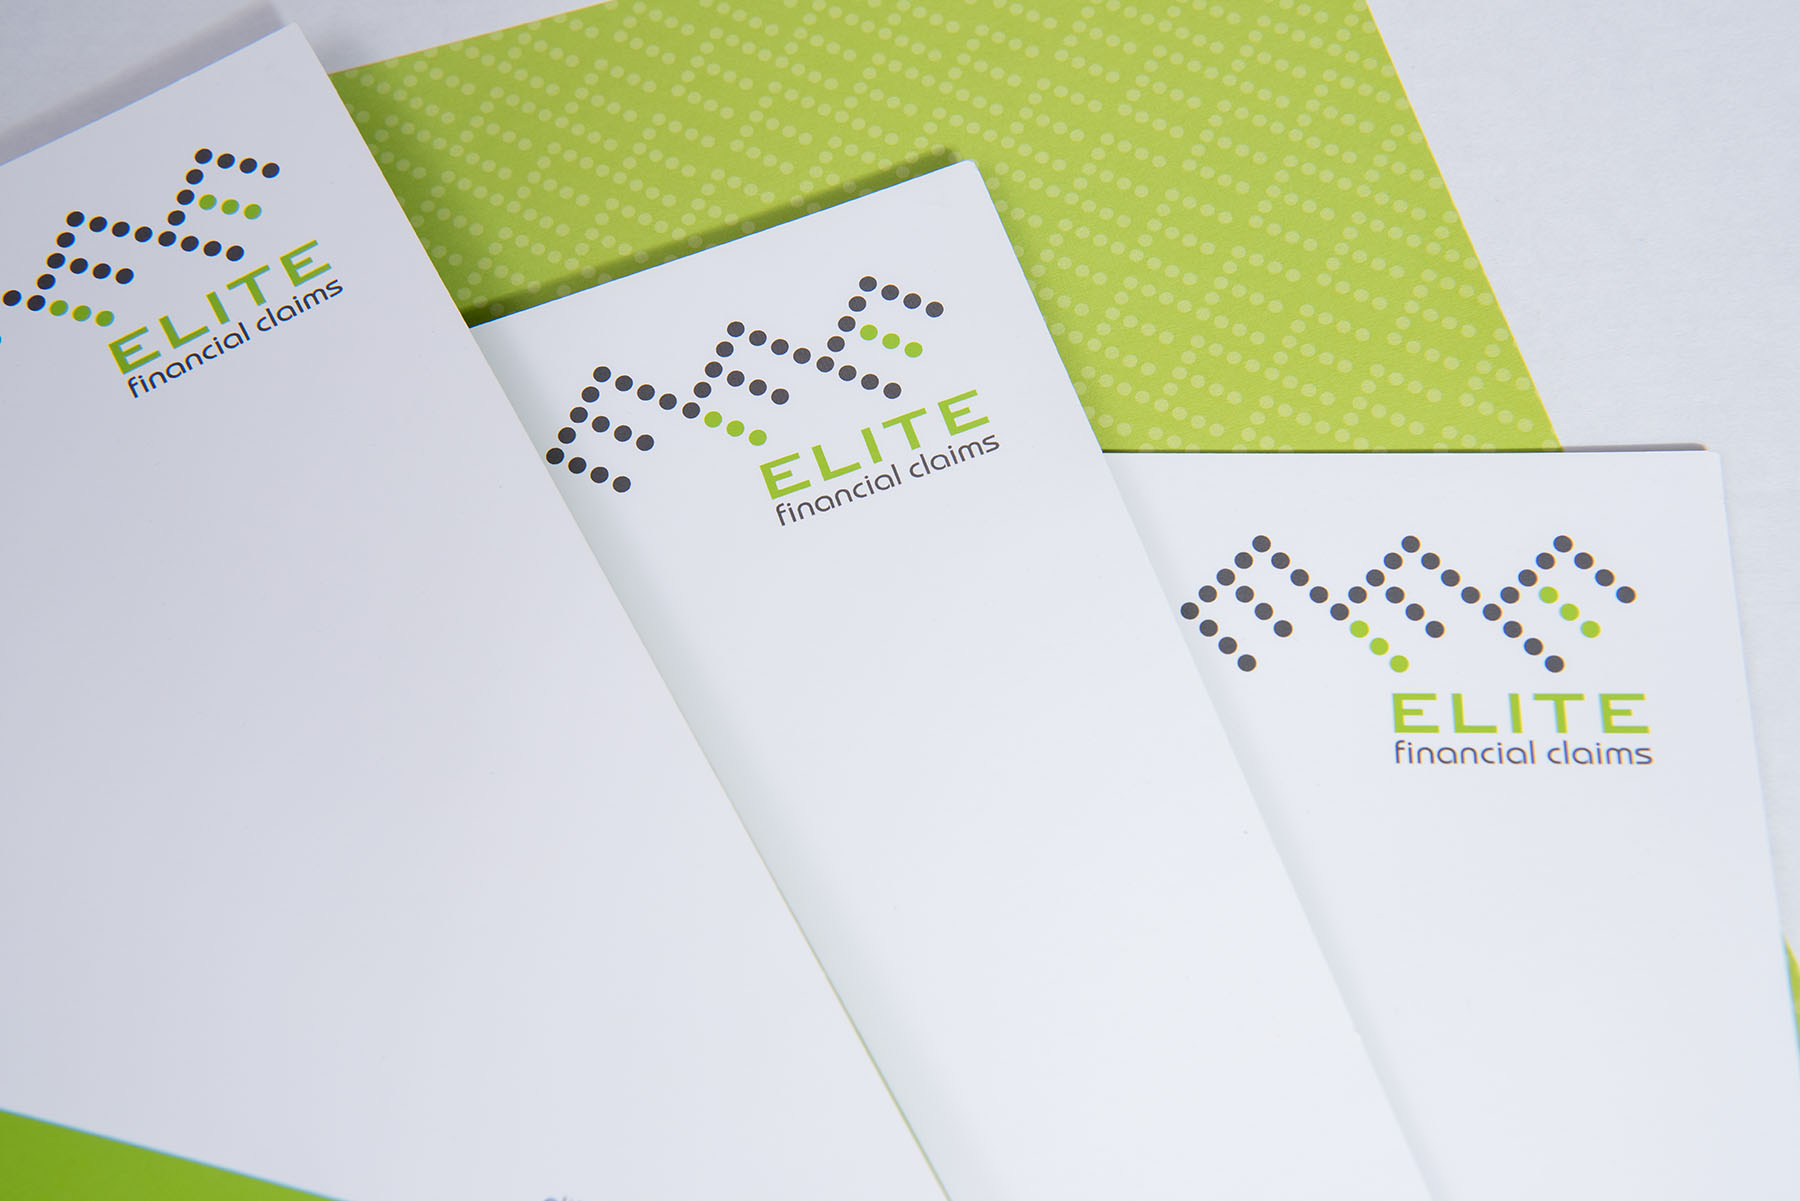 Elite Financial Claims stationery